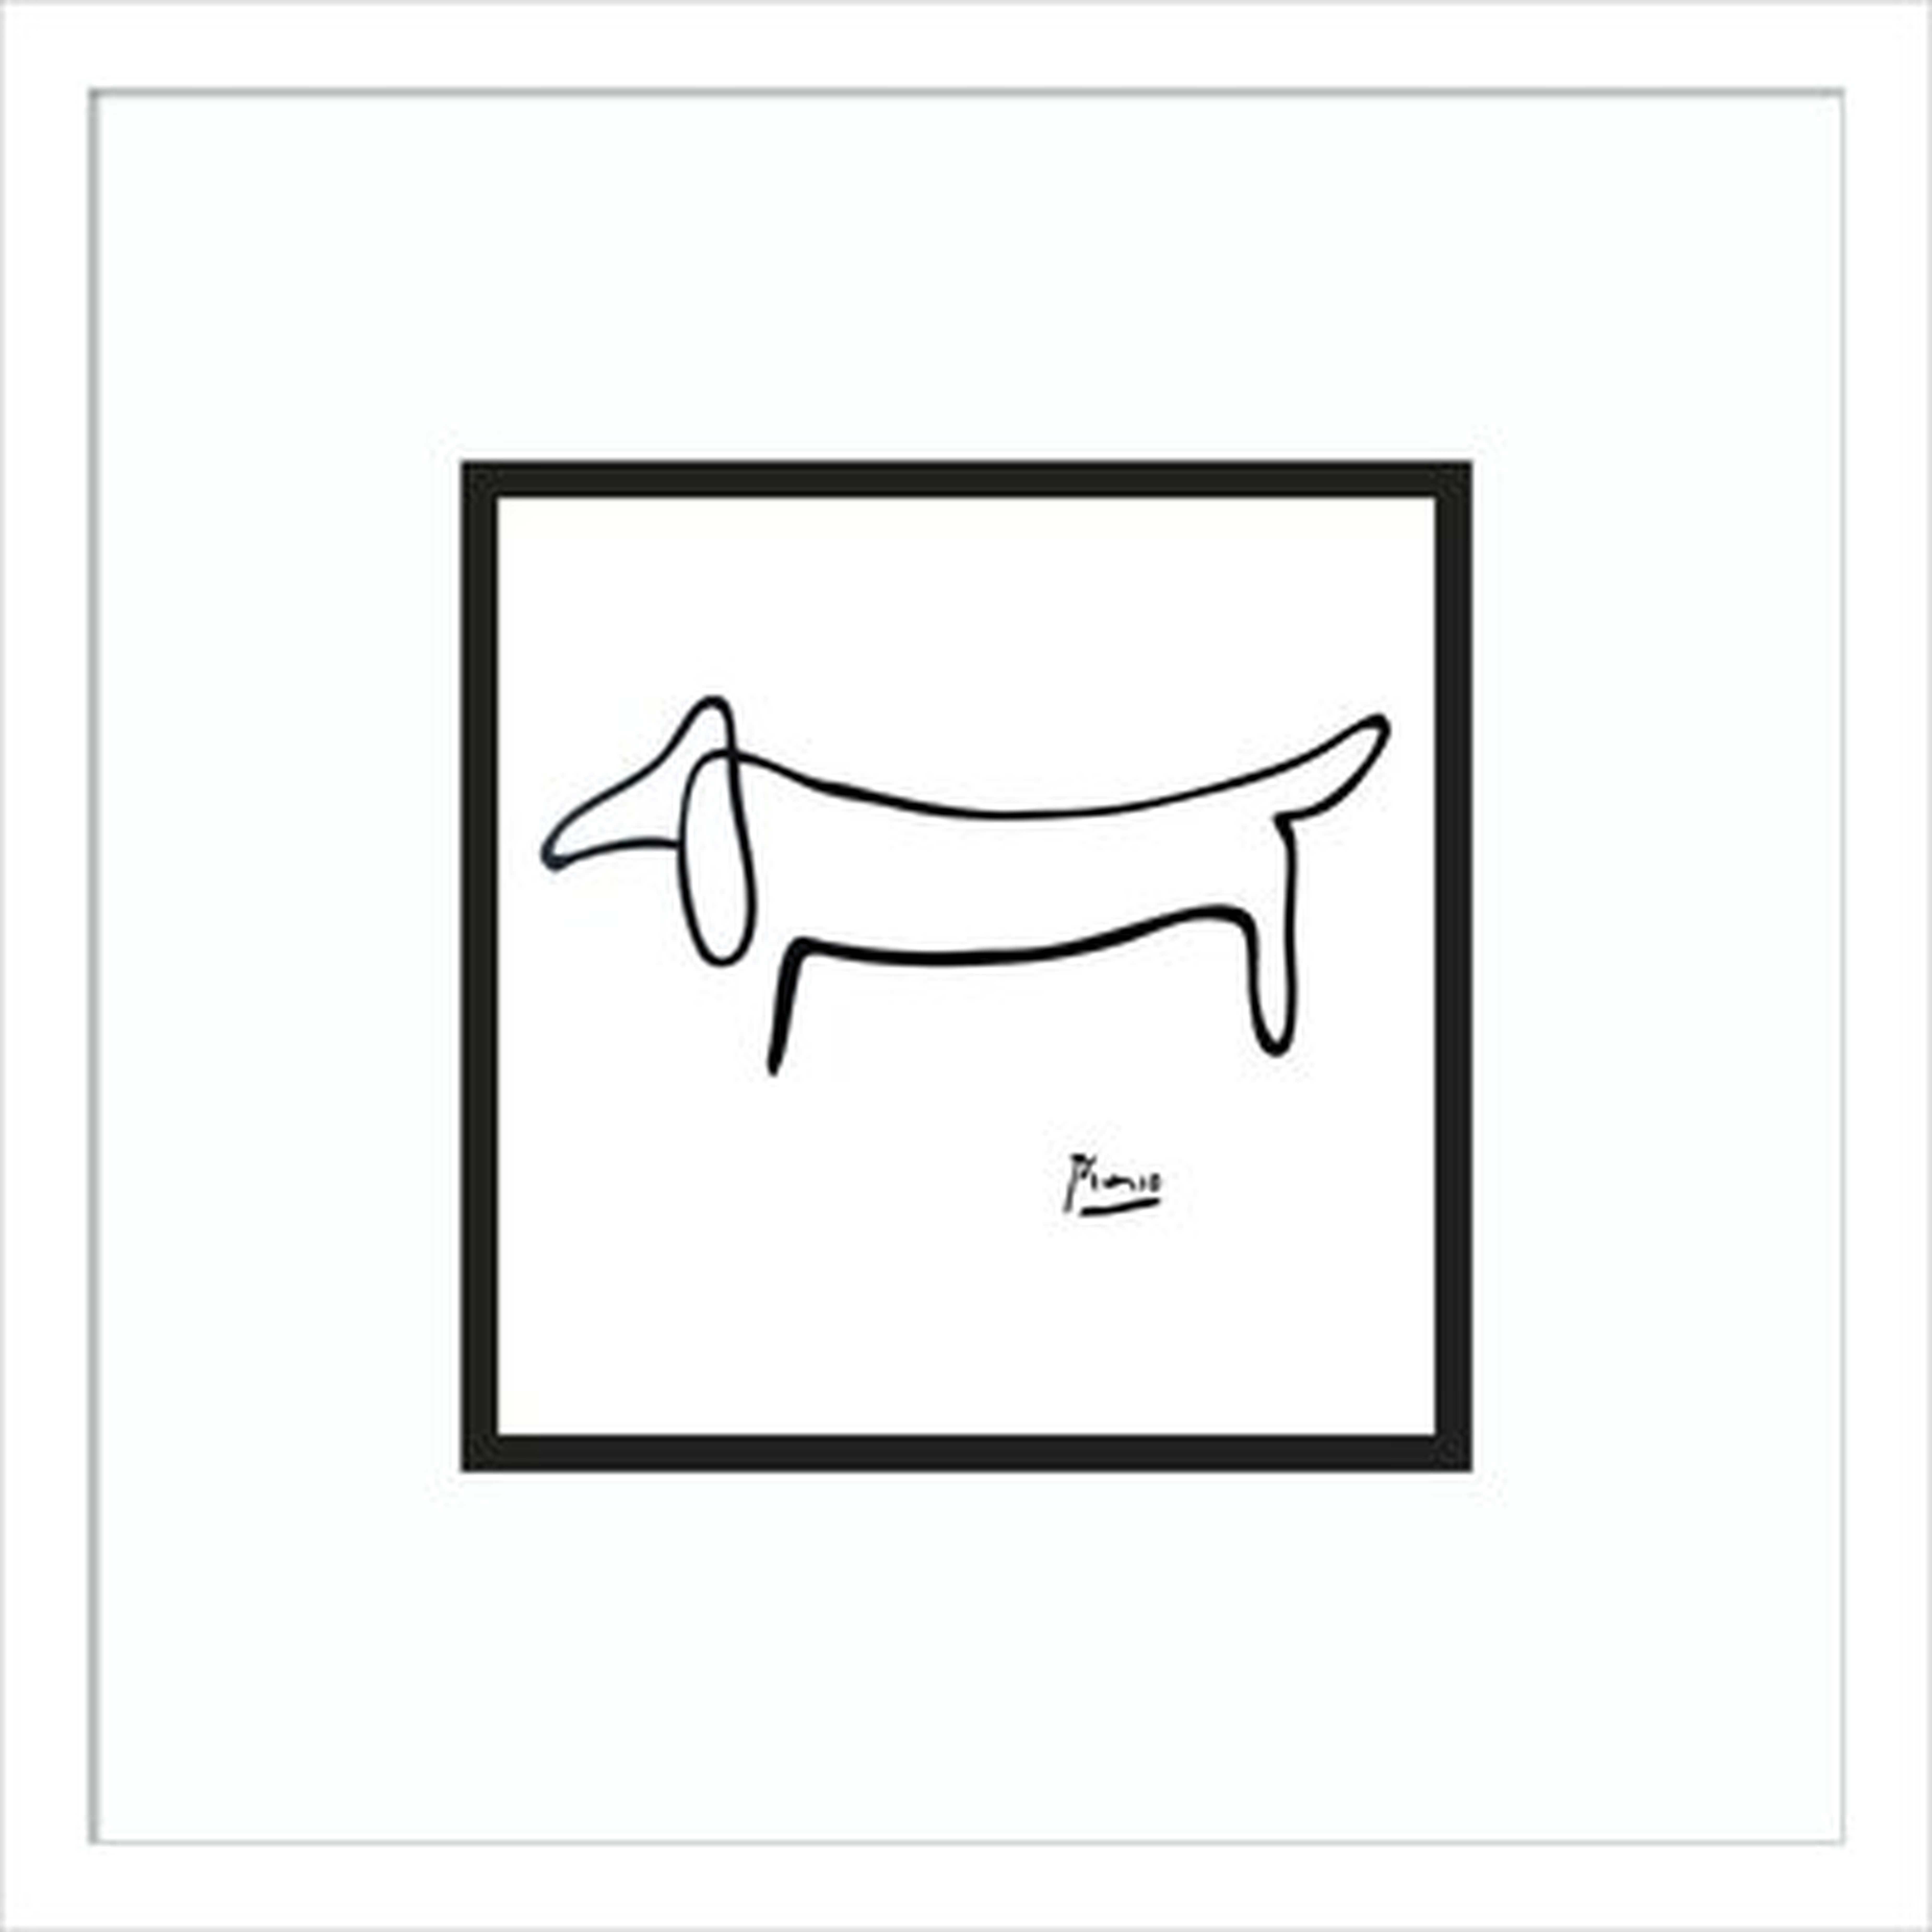 Le Chien (The Dog) by Pablo Picasso - Picture Frame Print on Paper - Wayfair